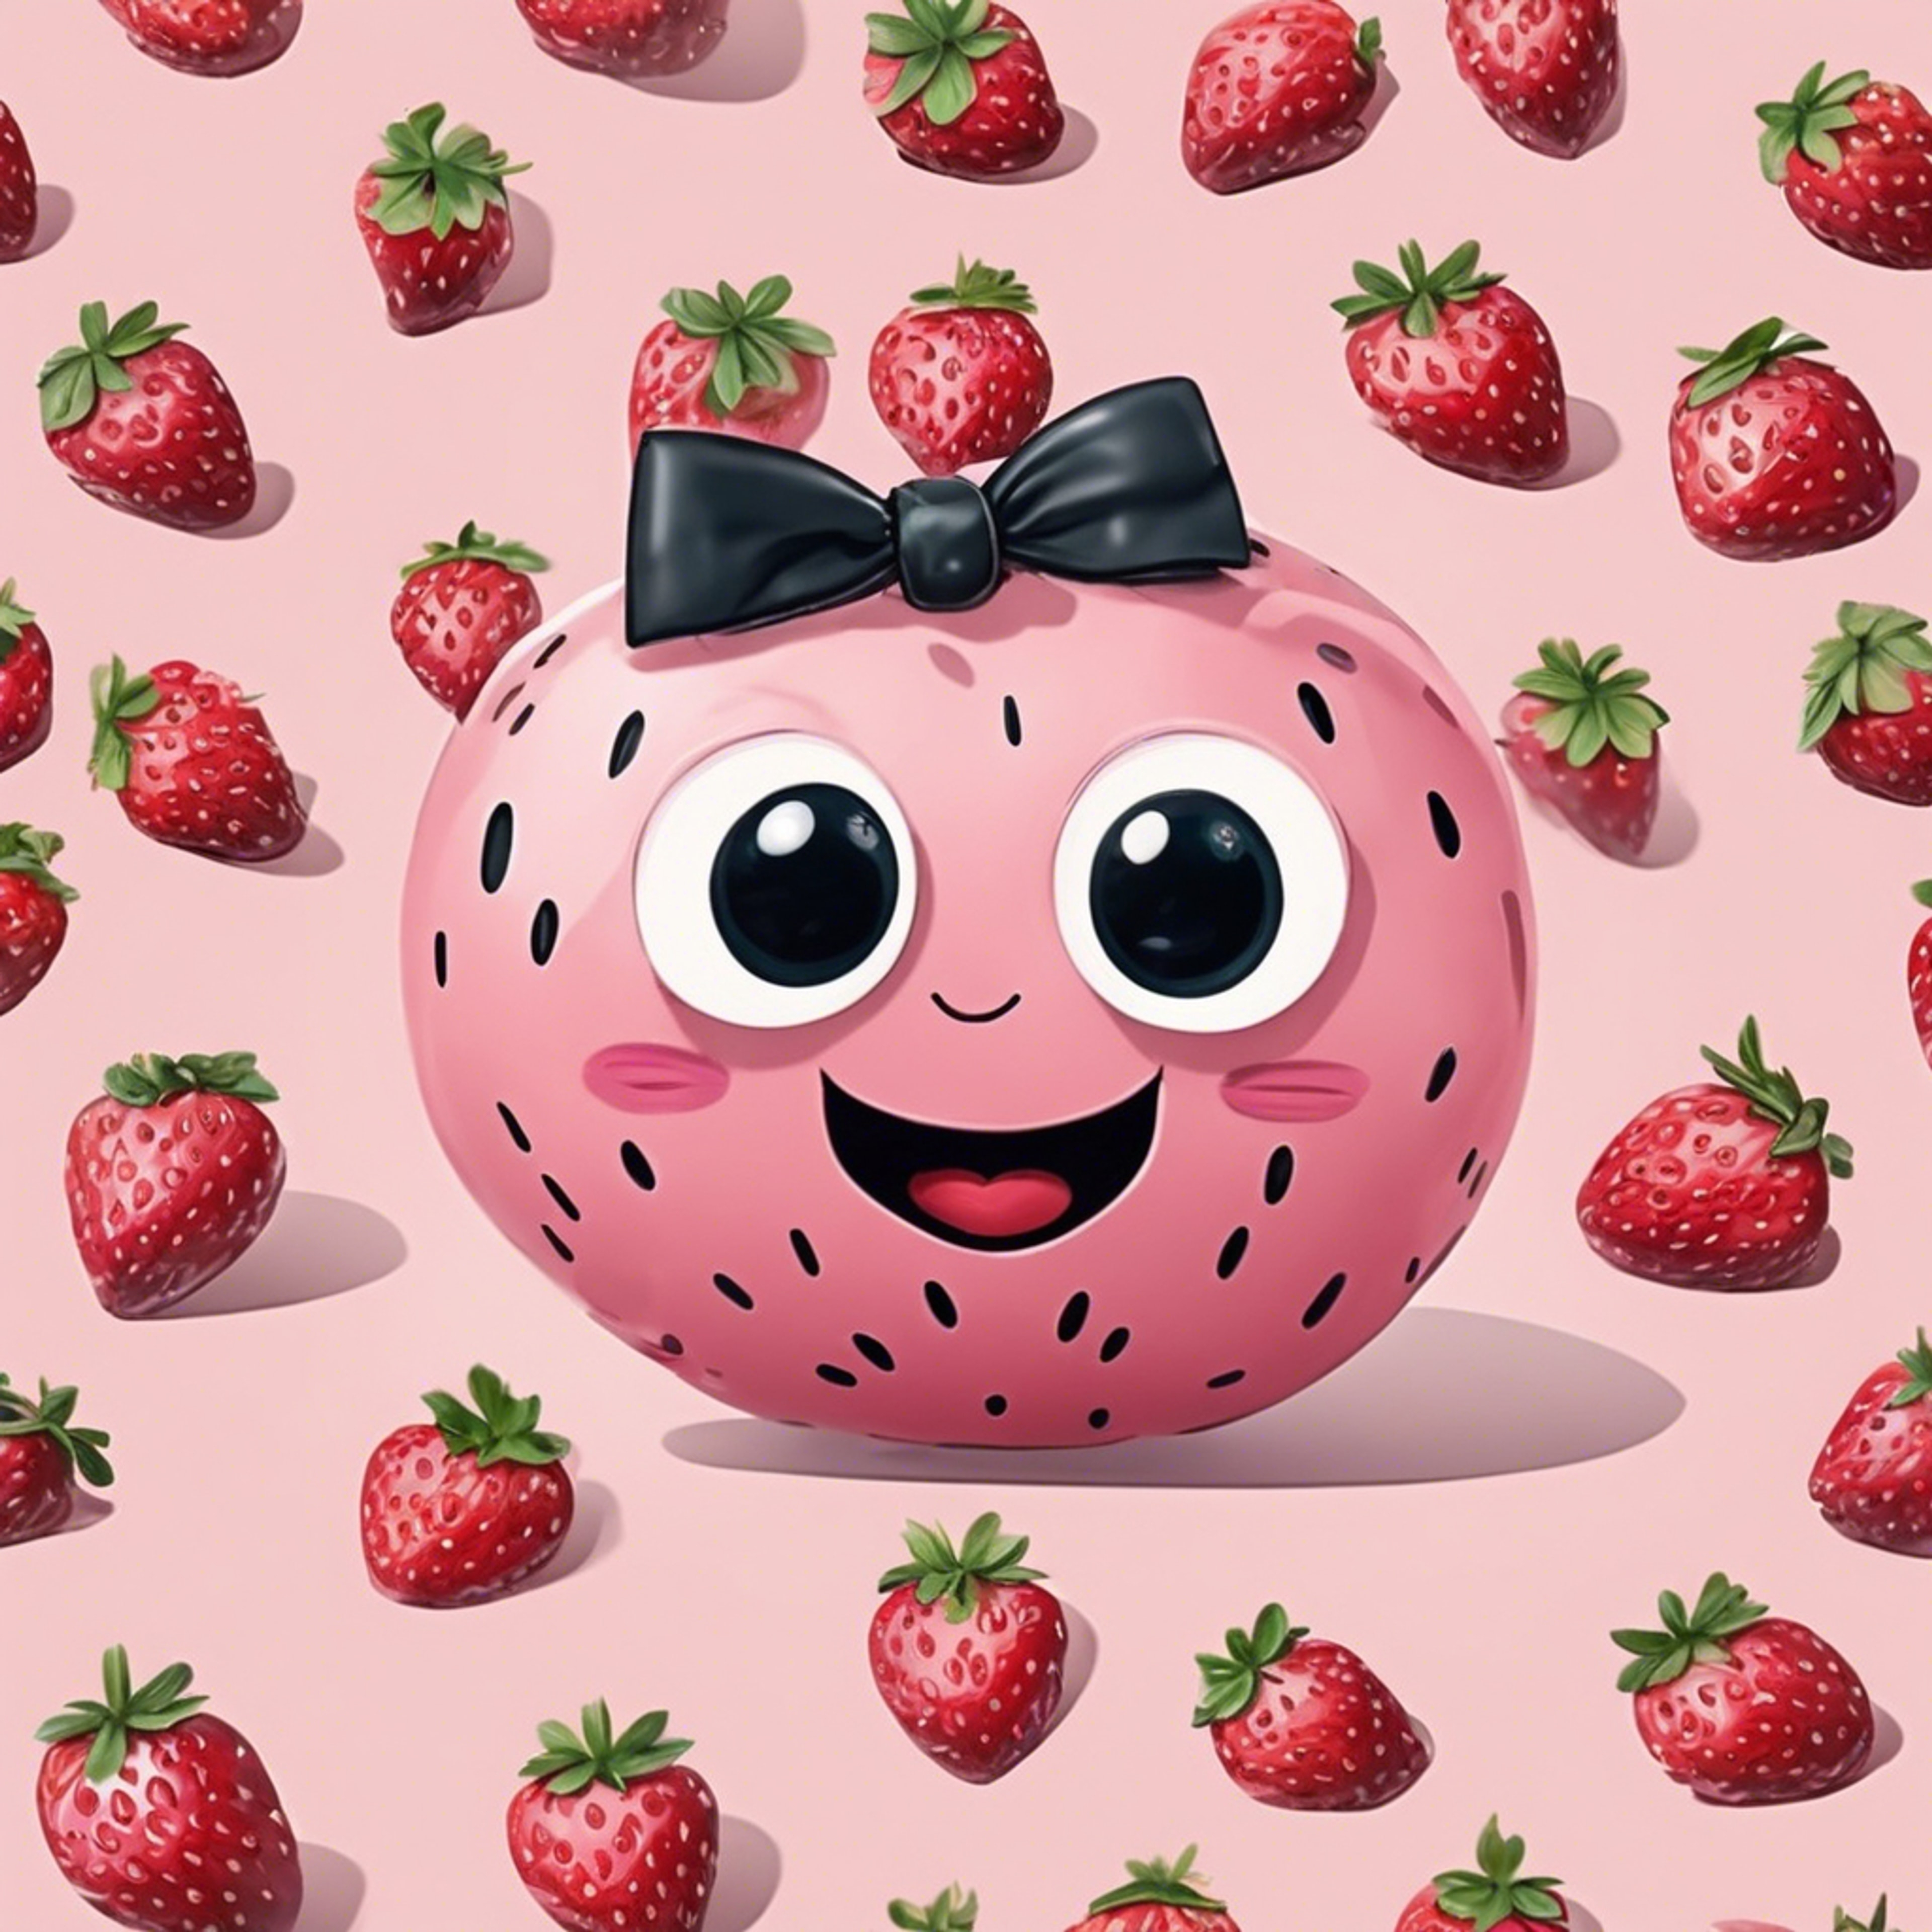 Cute, smiling light pink kawaii strawberries with big eyes and little bow ties. Papel de parede[24a5e2efca874b08b7f4]